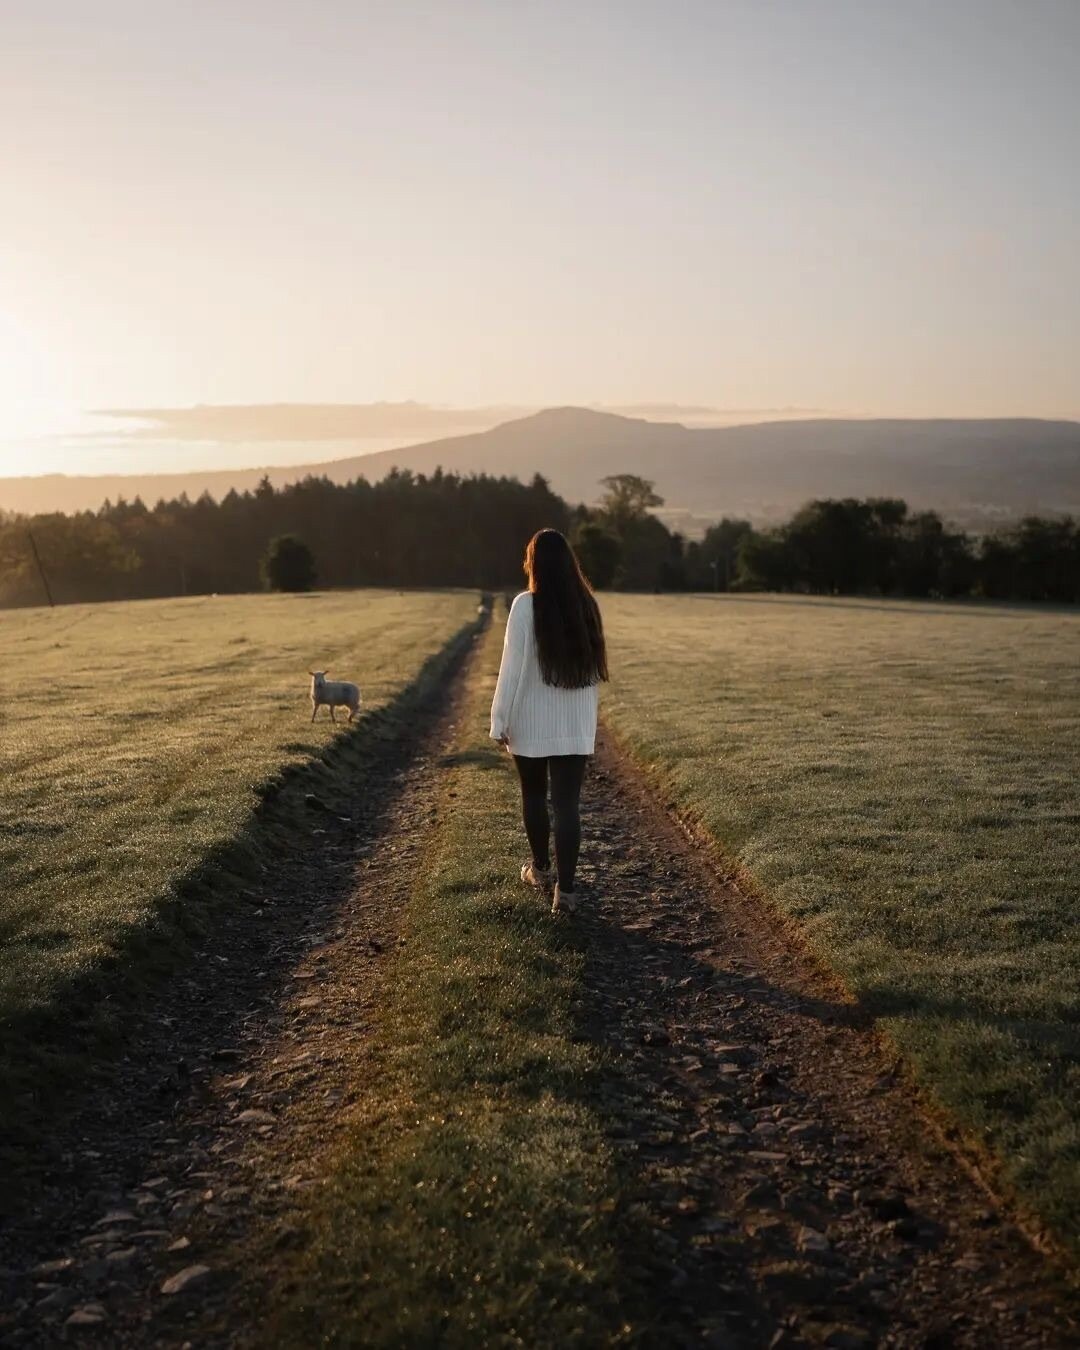 &ldquo;✨Captured a few shots during my last break in the beautiful Shropshire Hills. It was the perfect place to unwind.&rdquo;⁠
⁠
Repost from @annabukowskaphotography